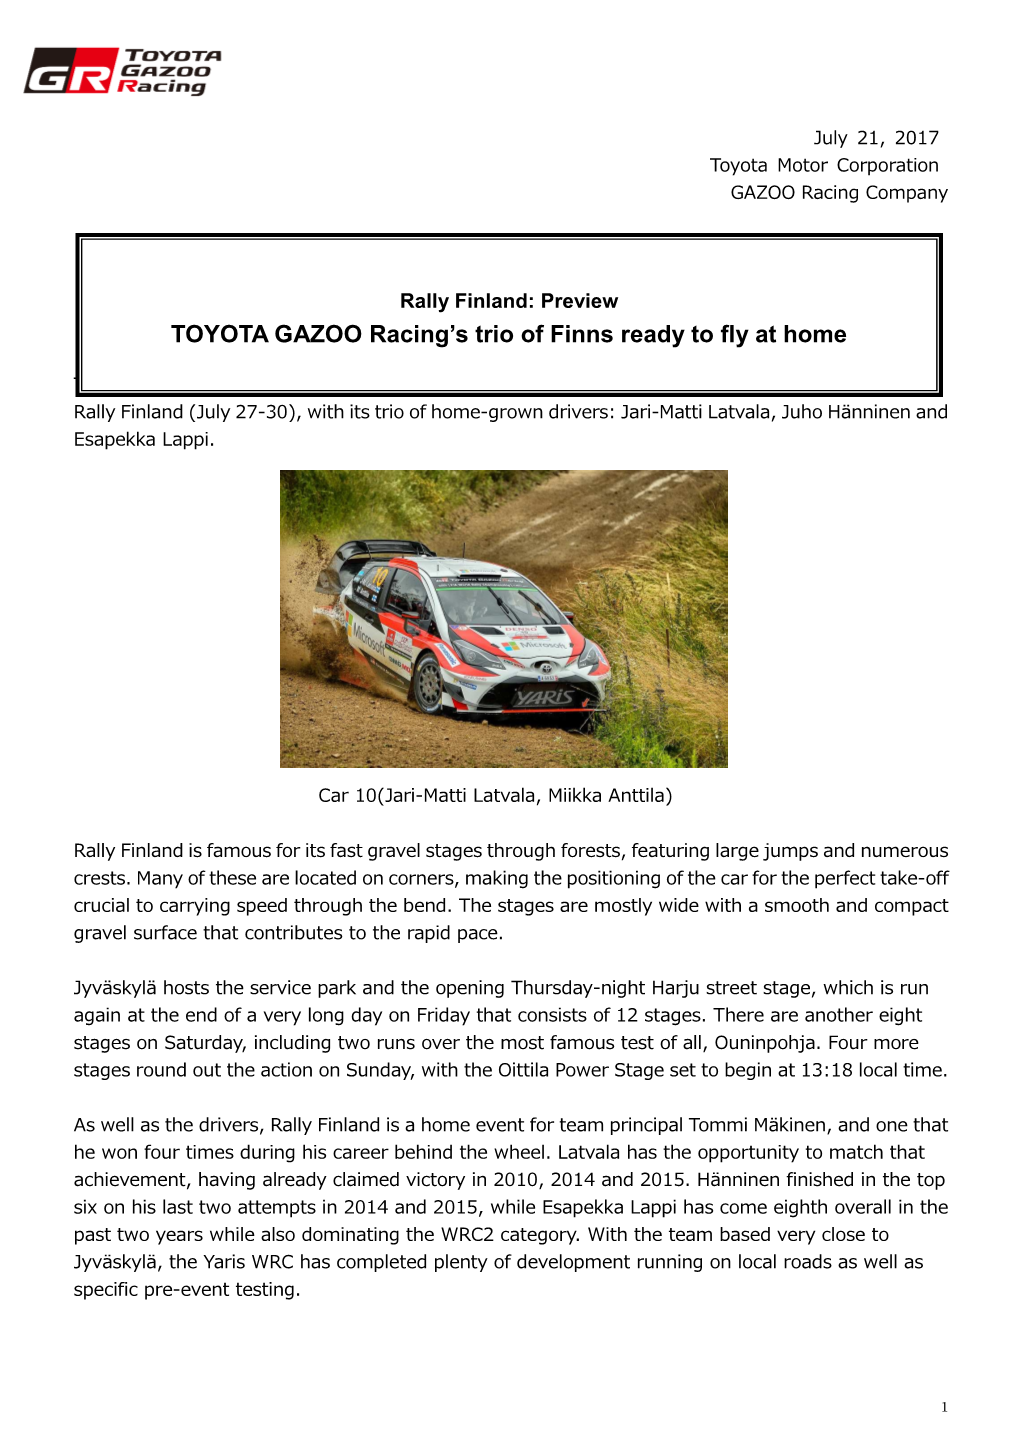 Final Toyota Finland Preview